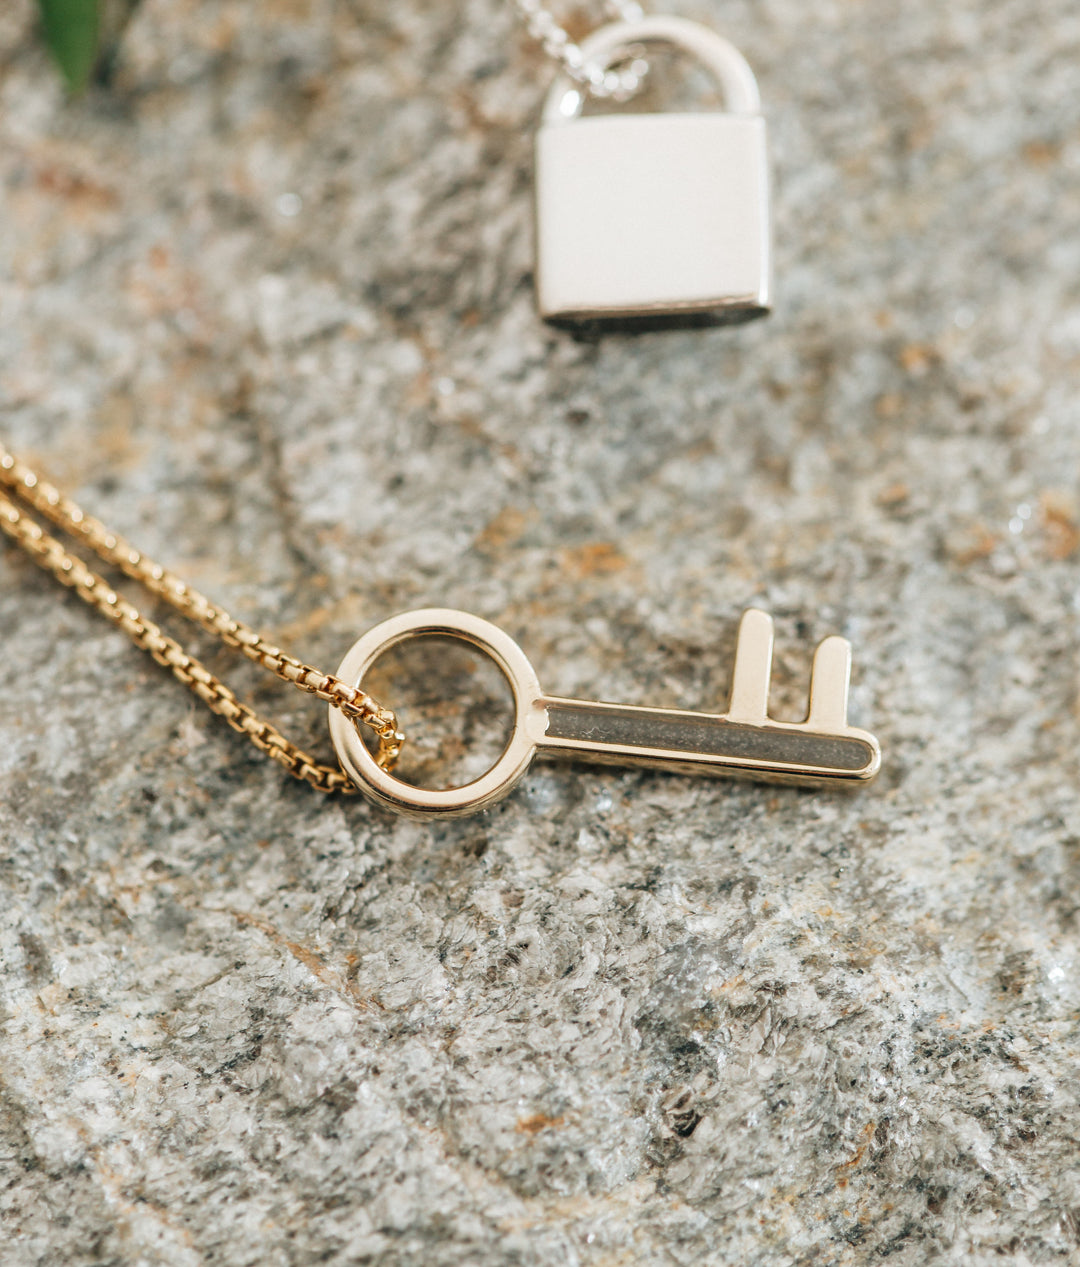 Pictured here is close by me jewelry's Key Cremains Pendant design in 14K Yellow Gold lying flat on a multi-colored textured surface next to the Sterling Silver Lock Cremation Pendant